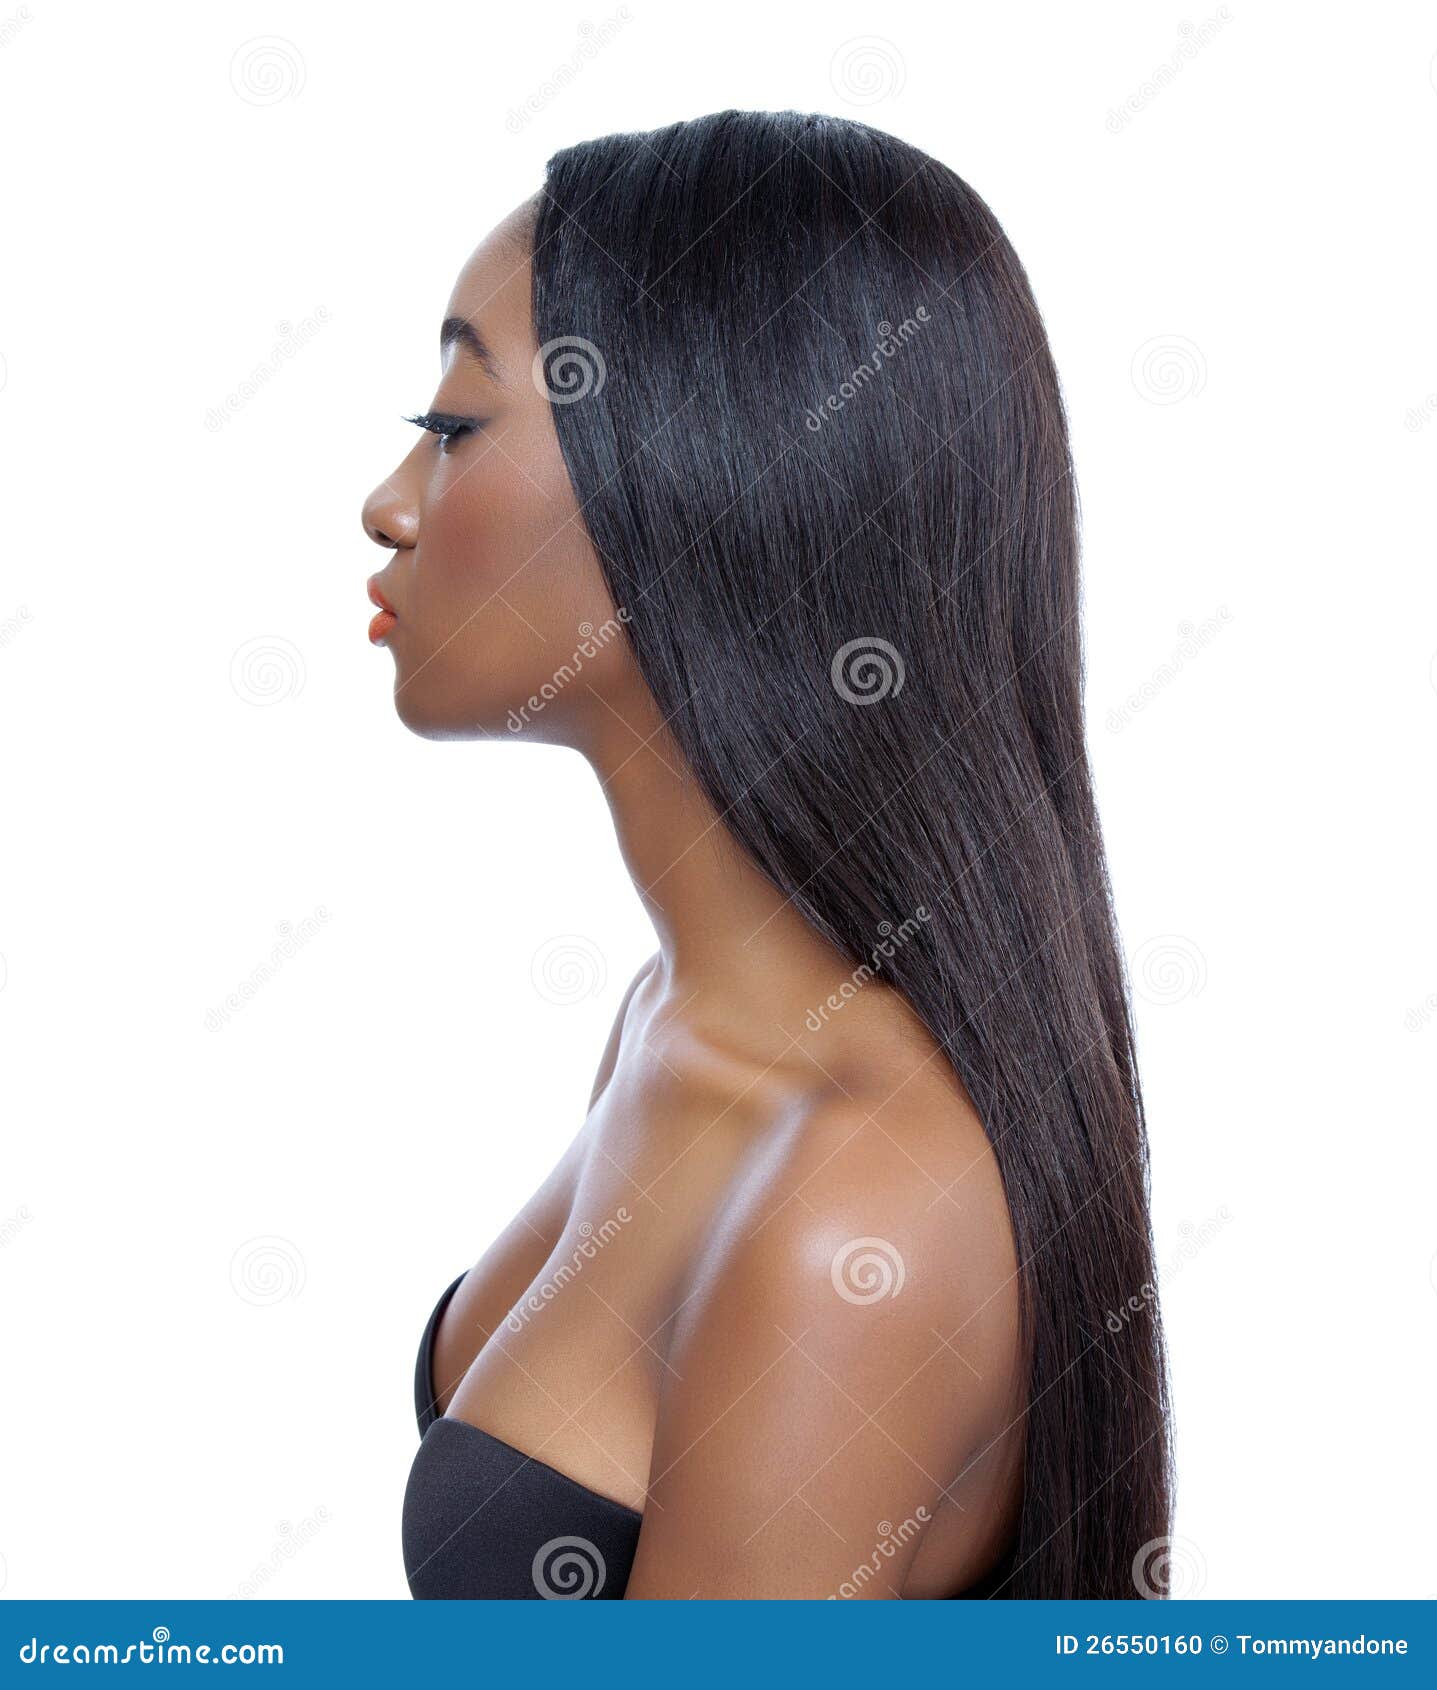 1,242 Black Girl Long Silky Hair Royalty-Free Images, Stock Photos &  Pictures